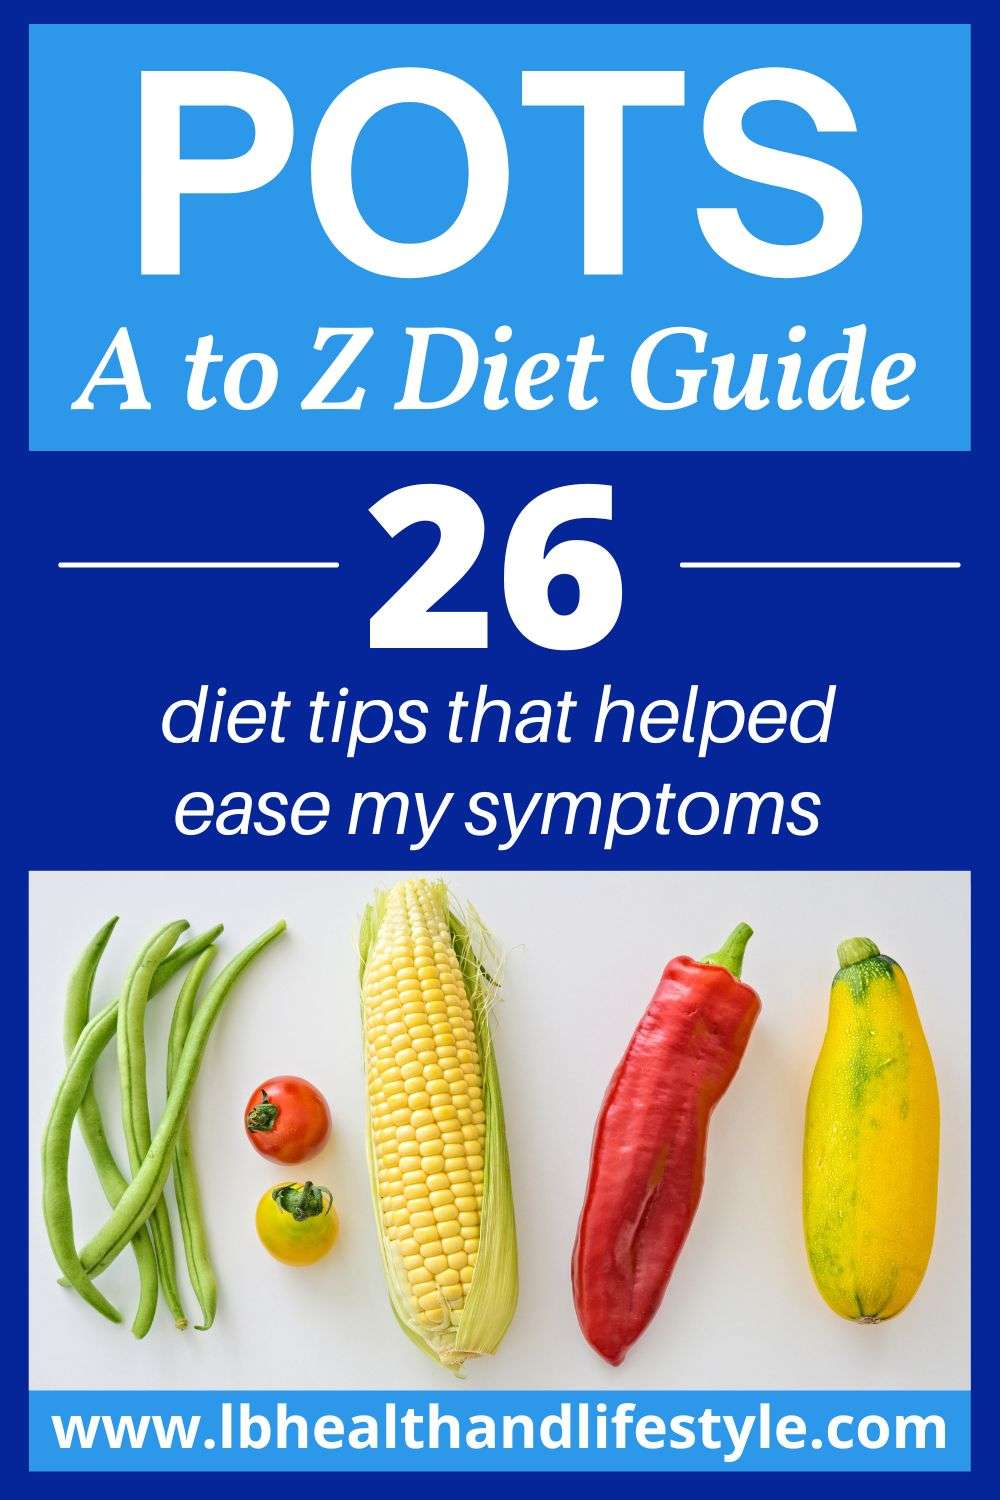 A to Z diet guide for POTS - 26 diet tips that helped ease my symptoms